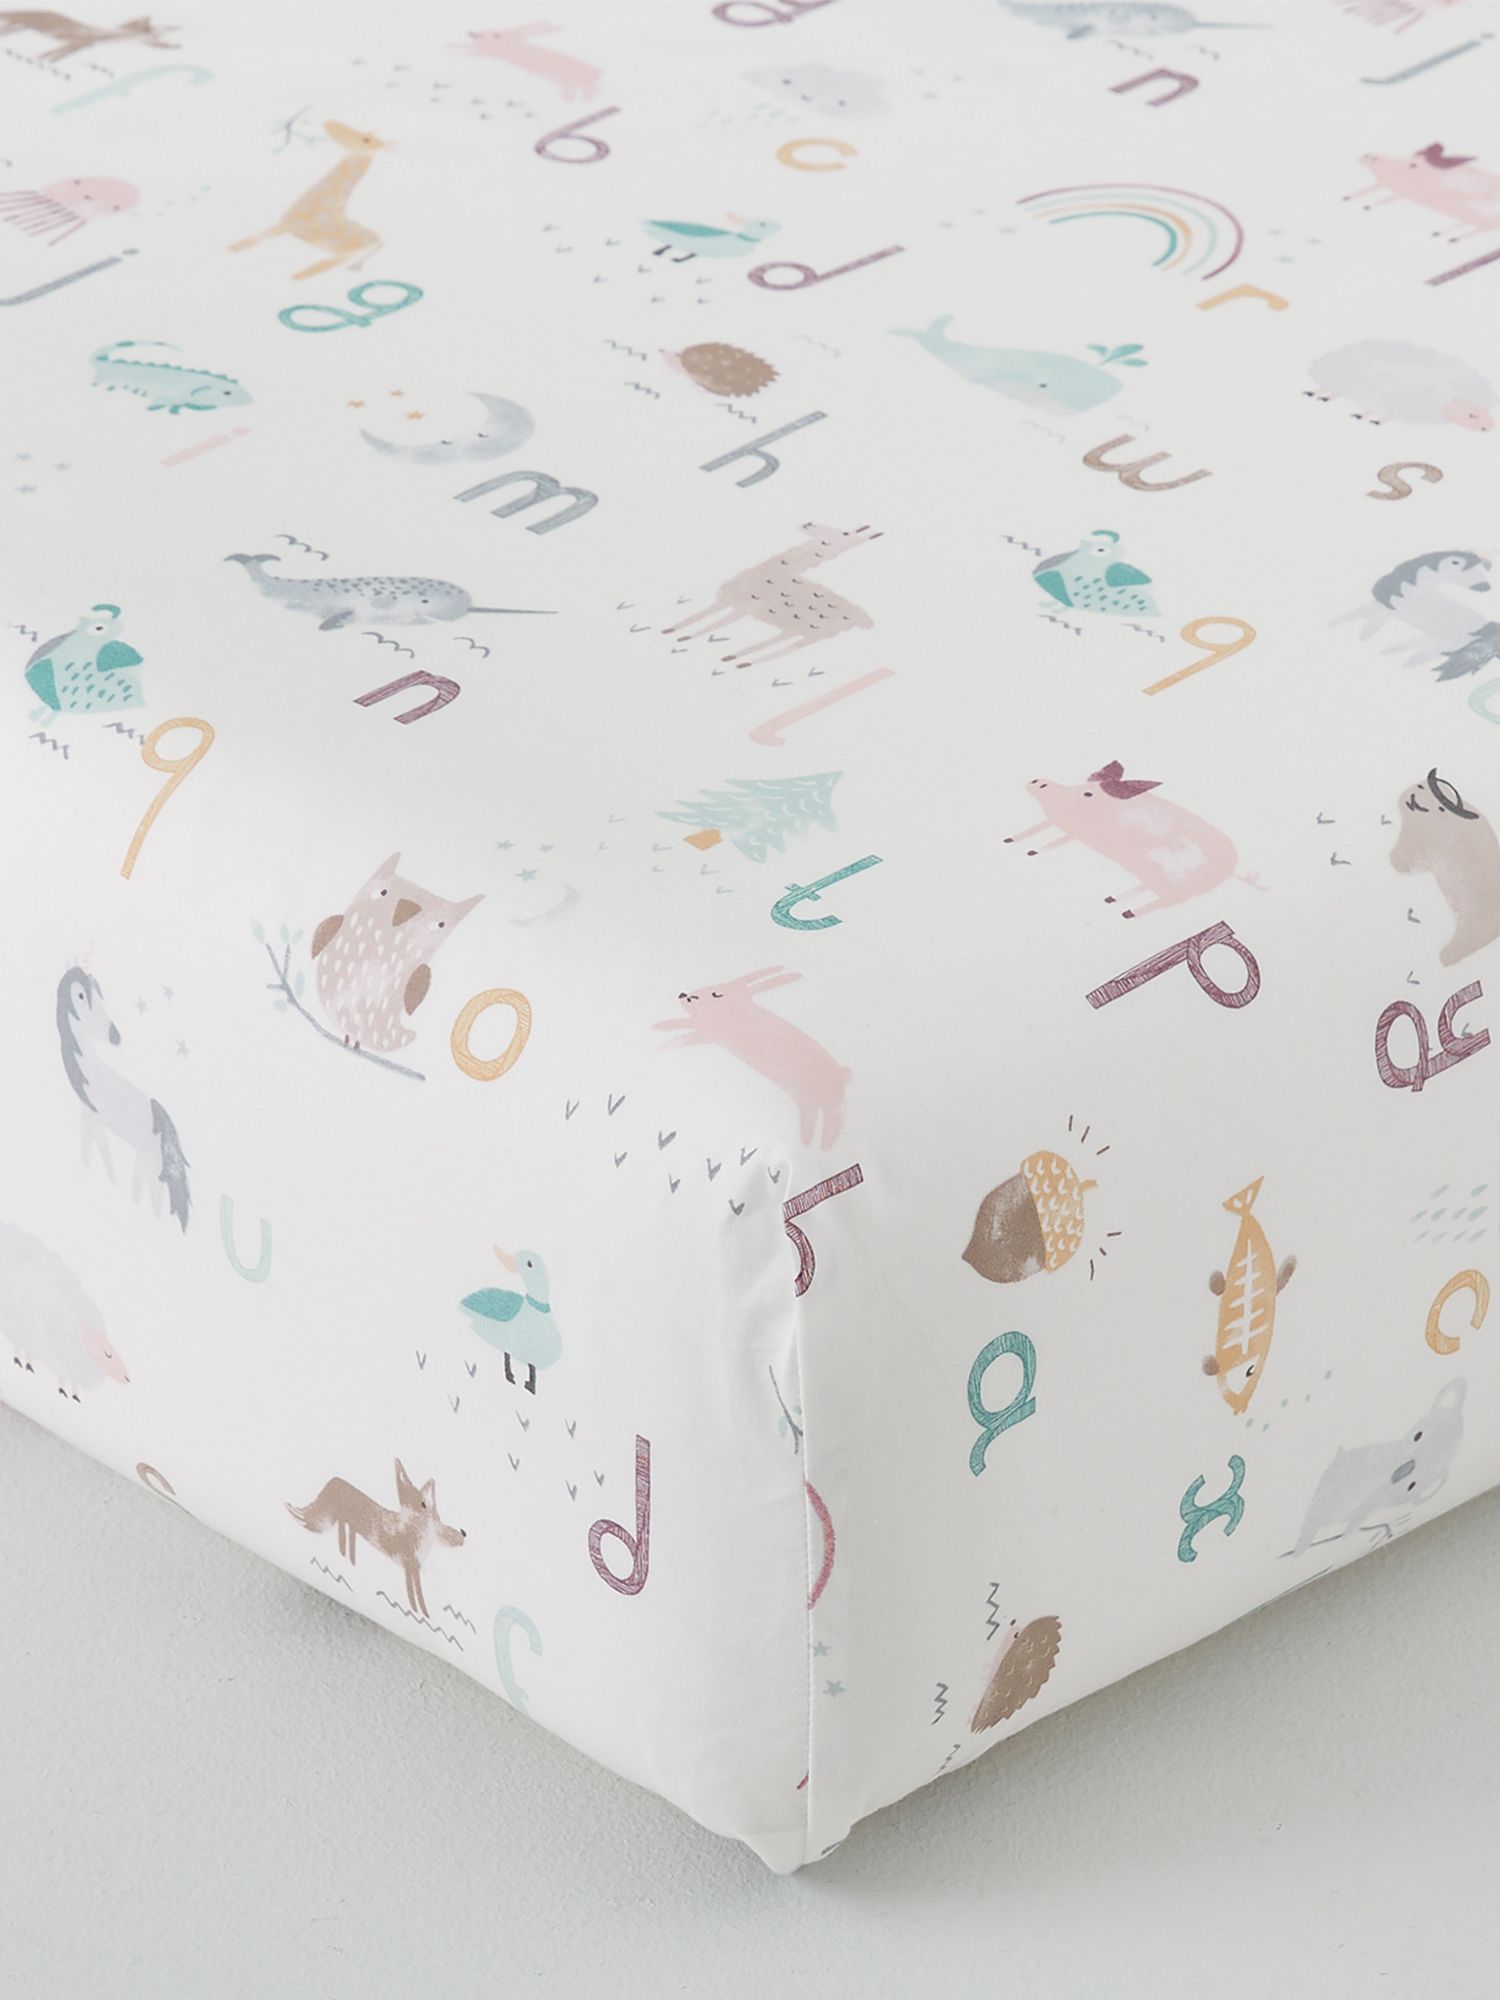 Pottery Barn Kids Quincy Animal Alphabet Fitted Crib Sheet, 70 x 132cm